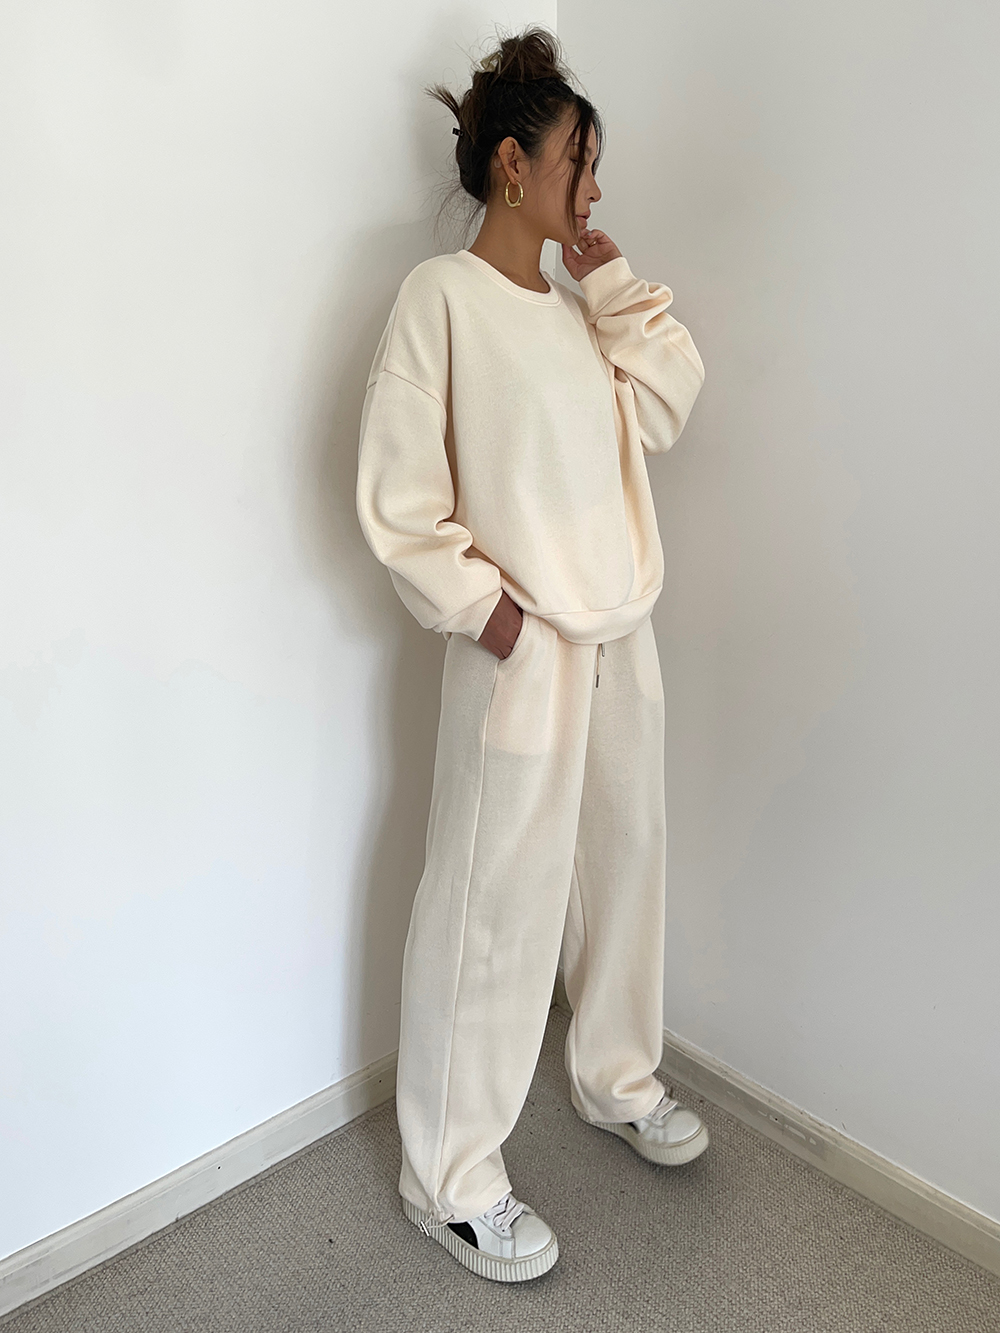 Women Two Piece Outfits Oversized Long Sleeve Sweatsuit Sets Casual Sweatshirt & Sweatpants Sets With Pockets